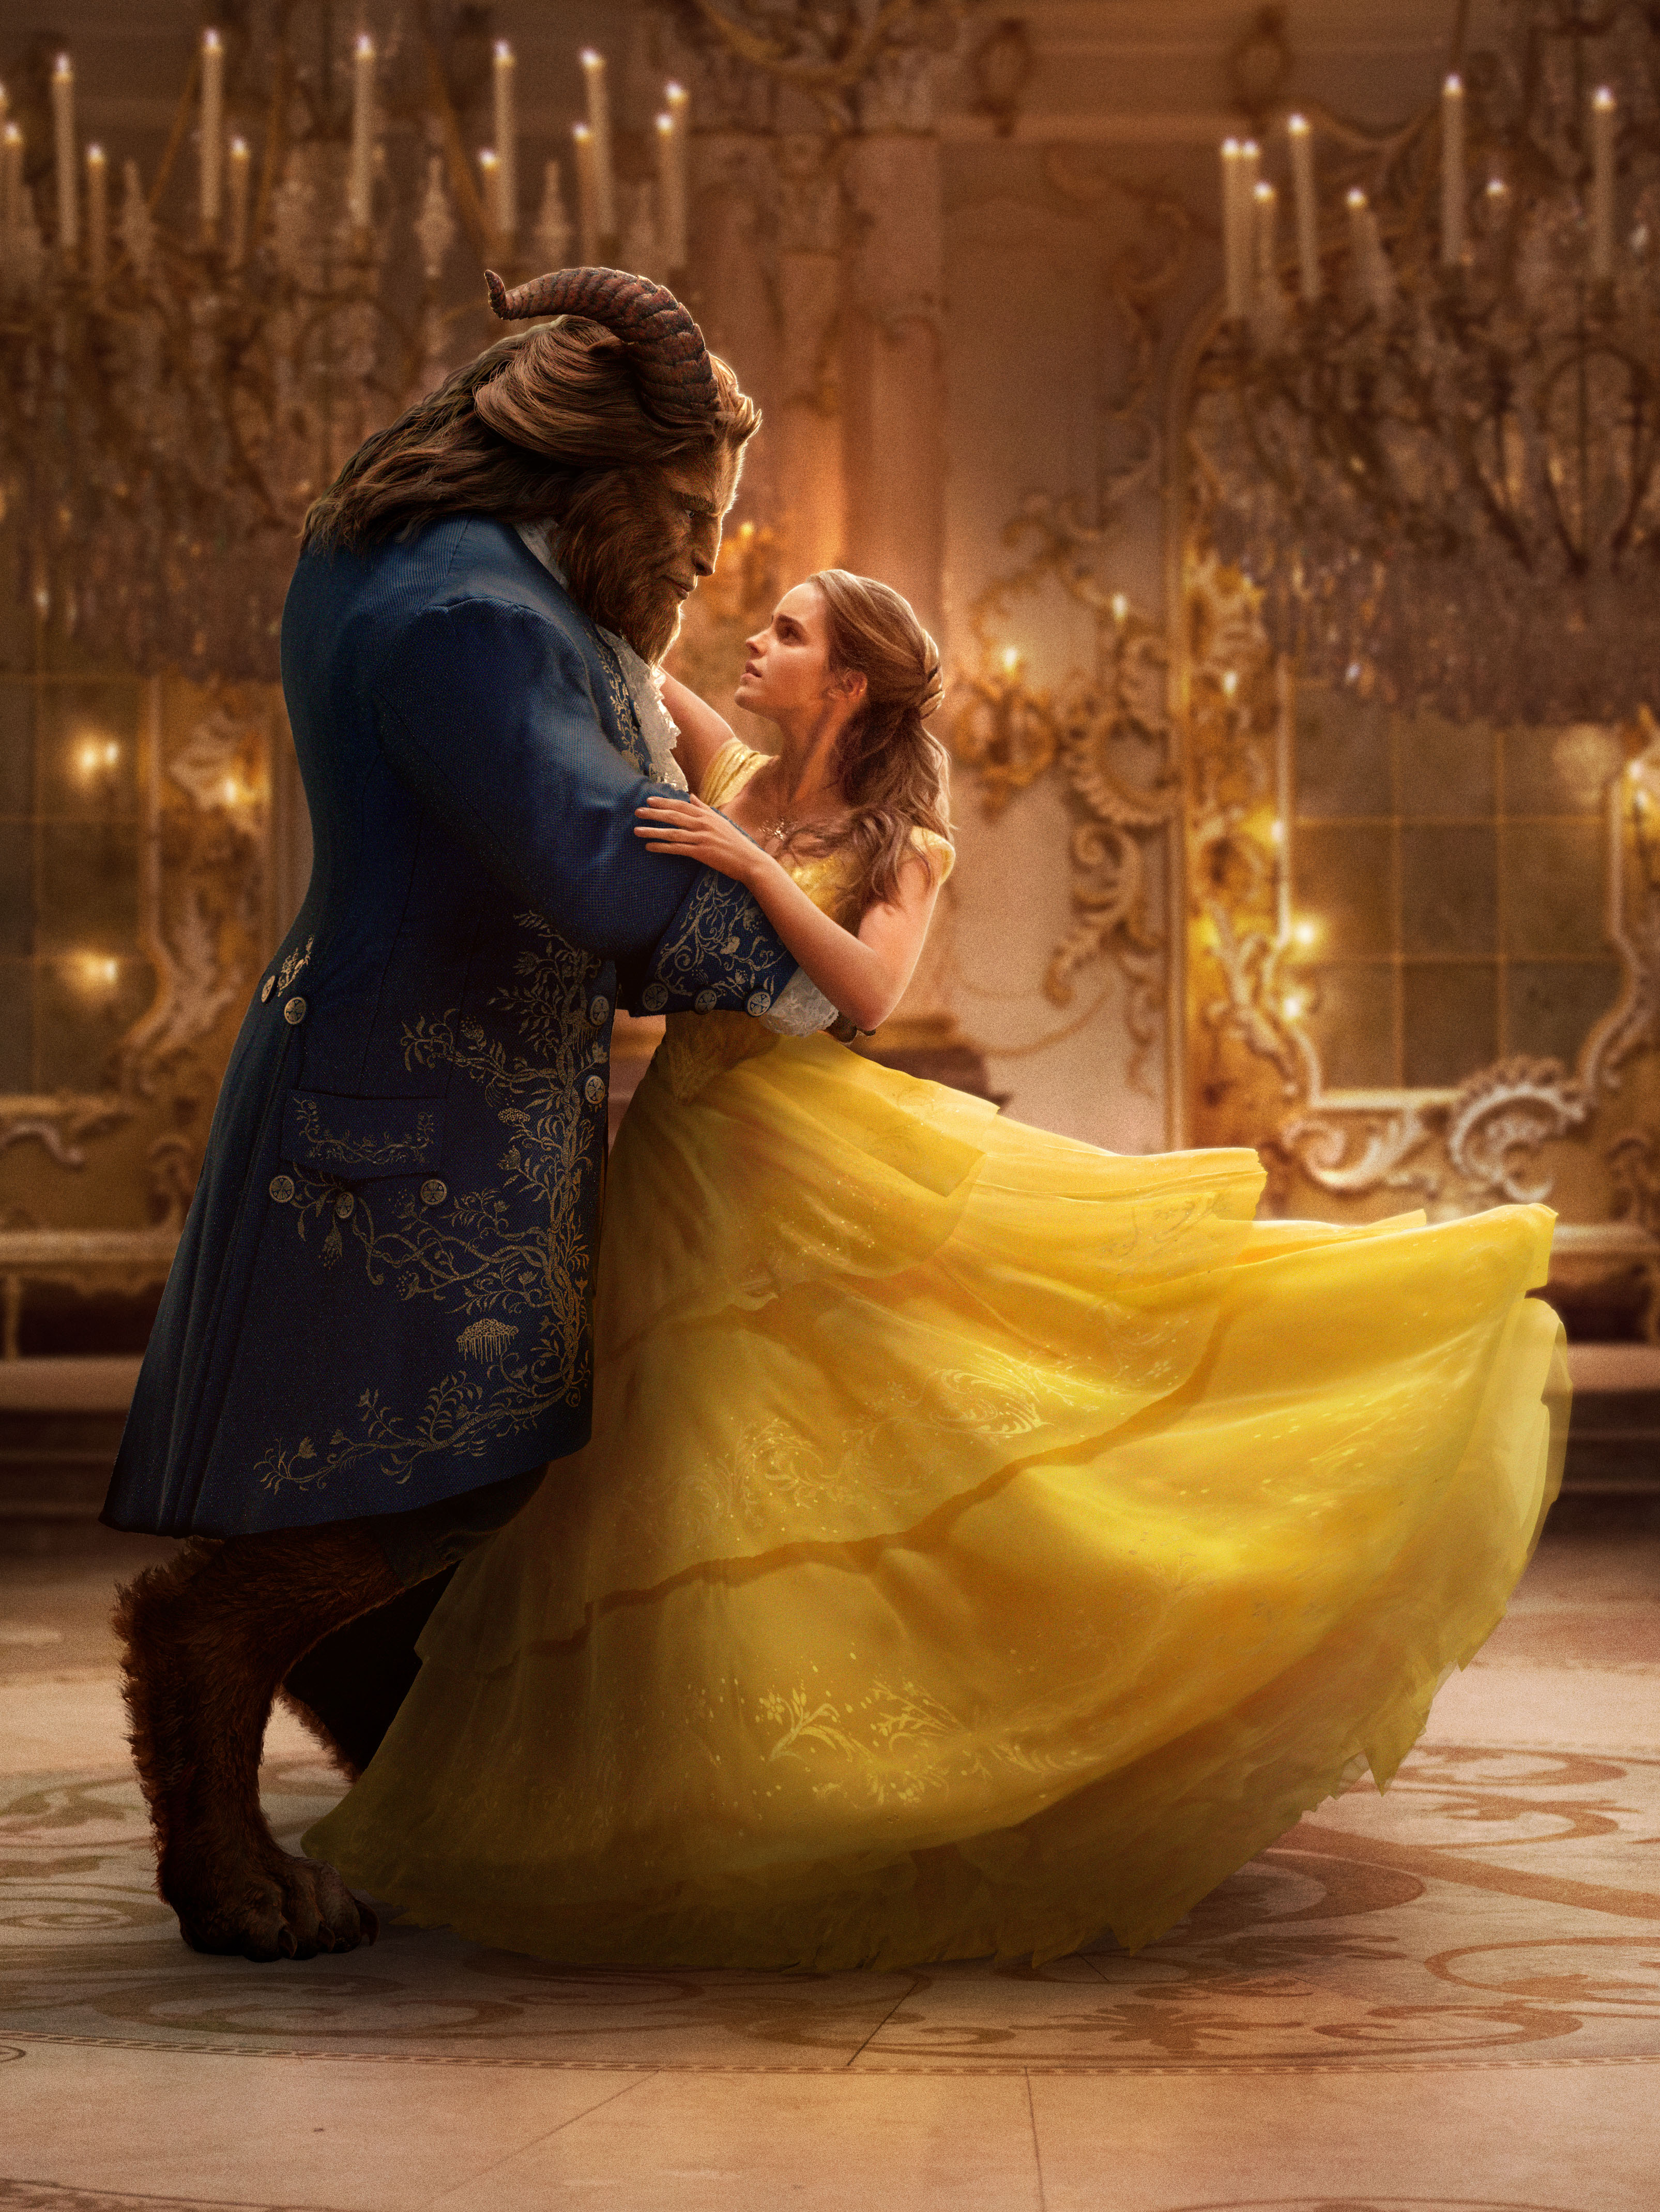 New Images for Disney’s Upcoming Live-Action Beauty and the Beast